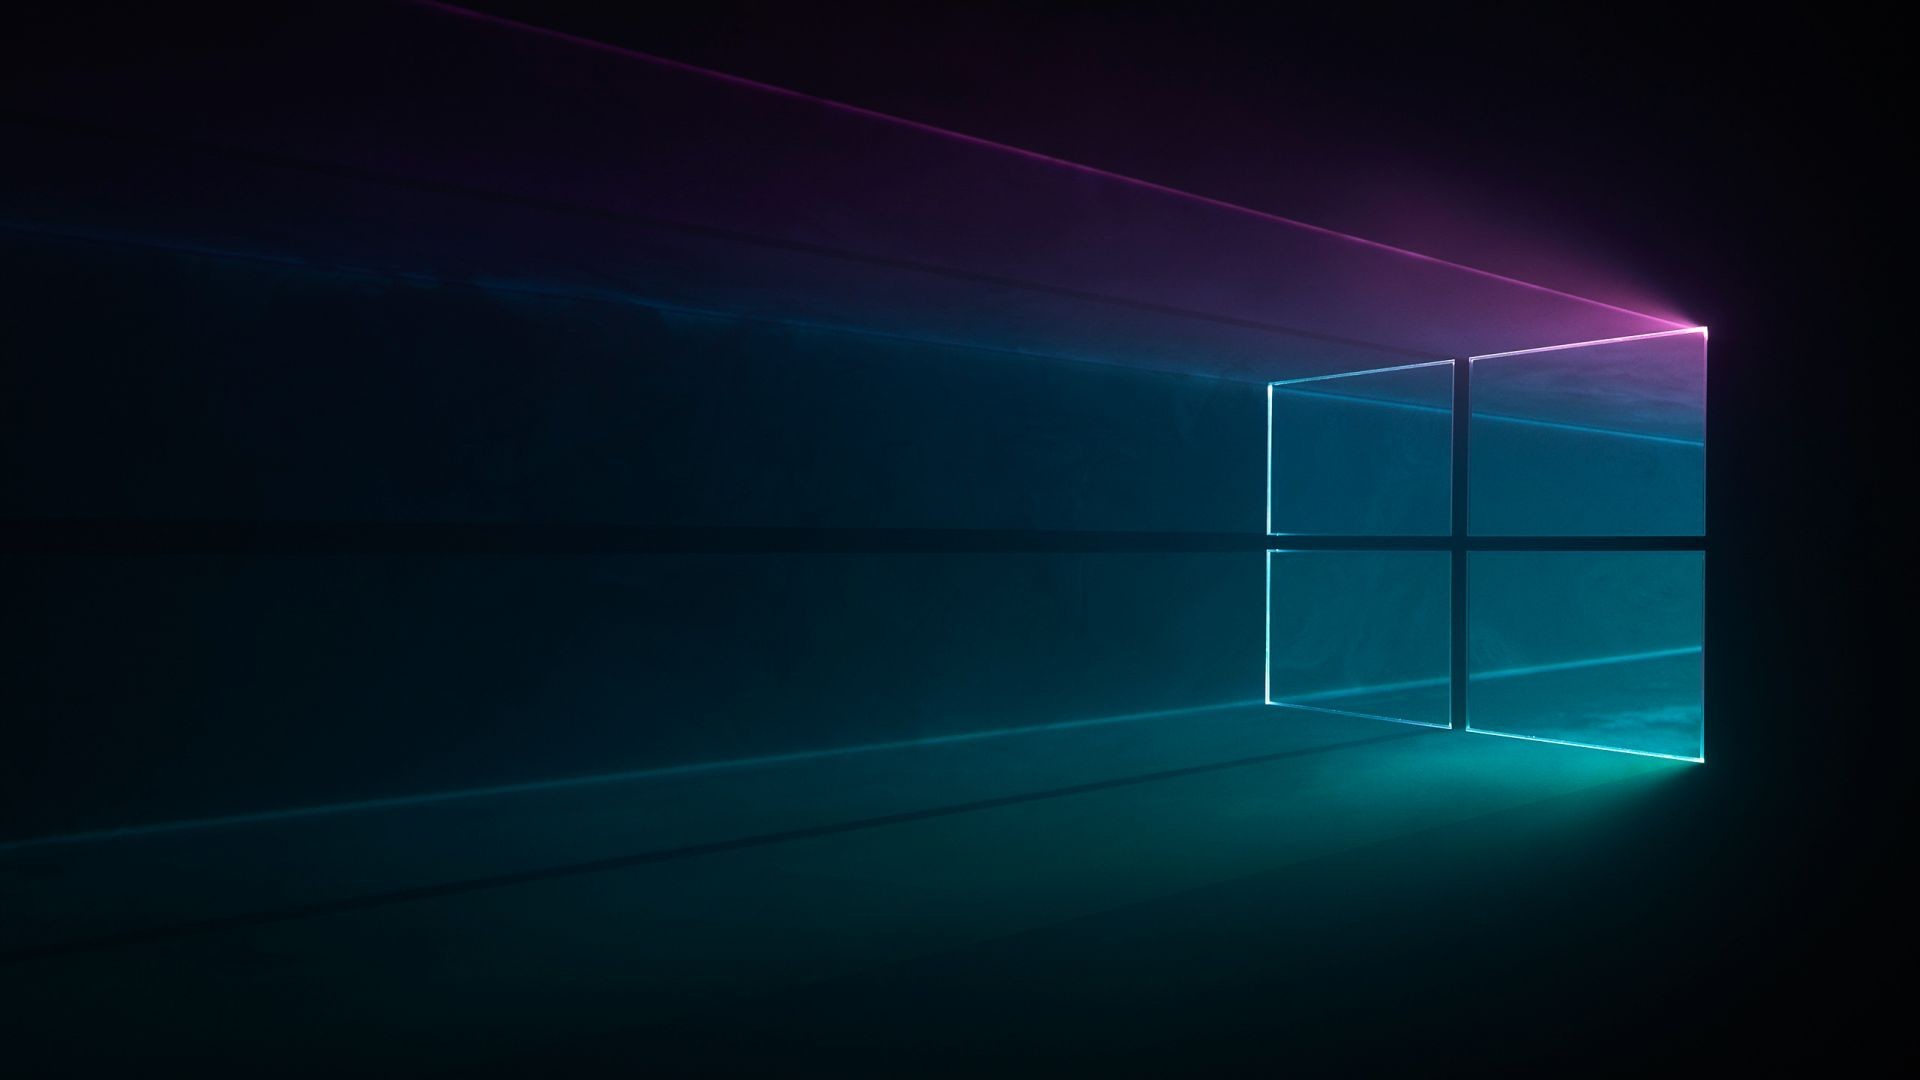 1920x1080 Download wallpapers of Windows 10, Windows logo, Multi color, HD,  Technology, #10955. Available in HD, 4K resolutions for desktop & mobile  phones